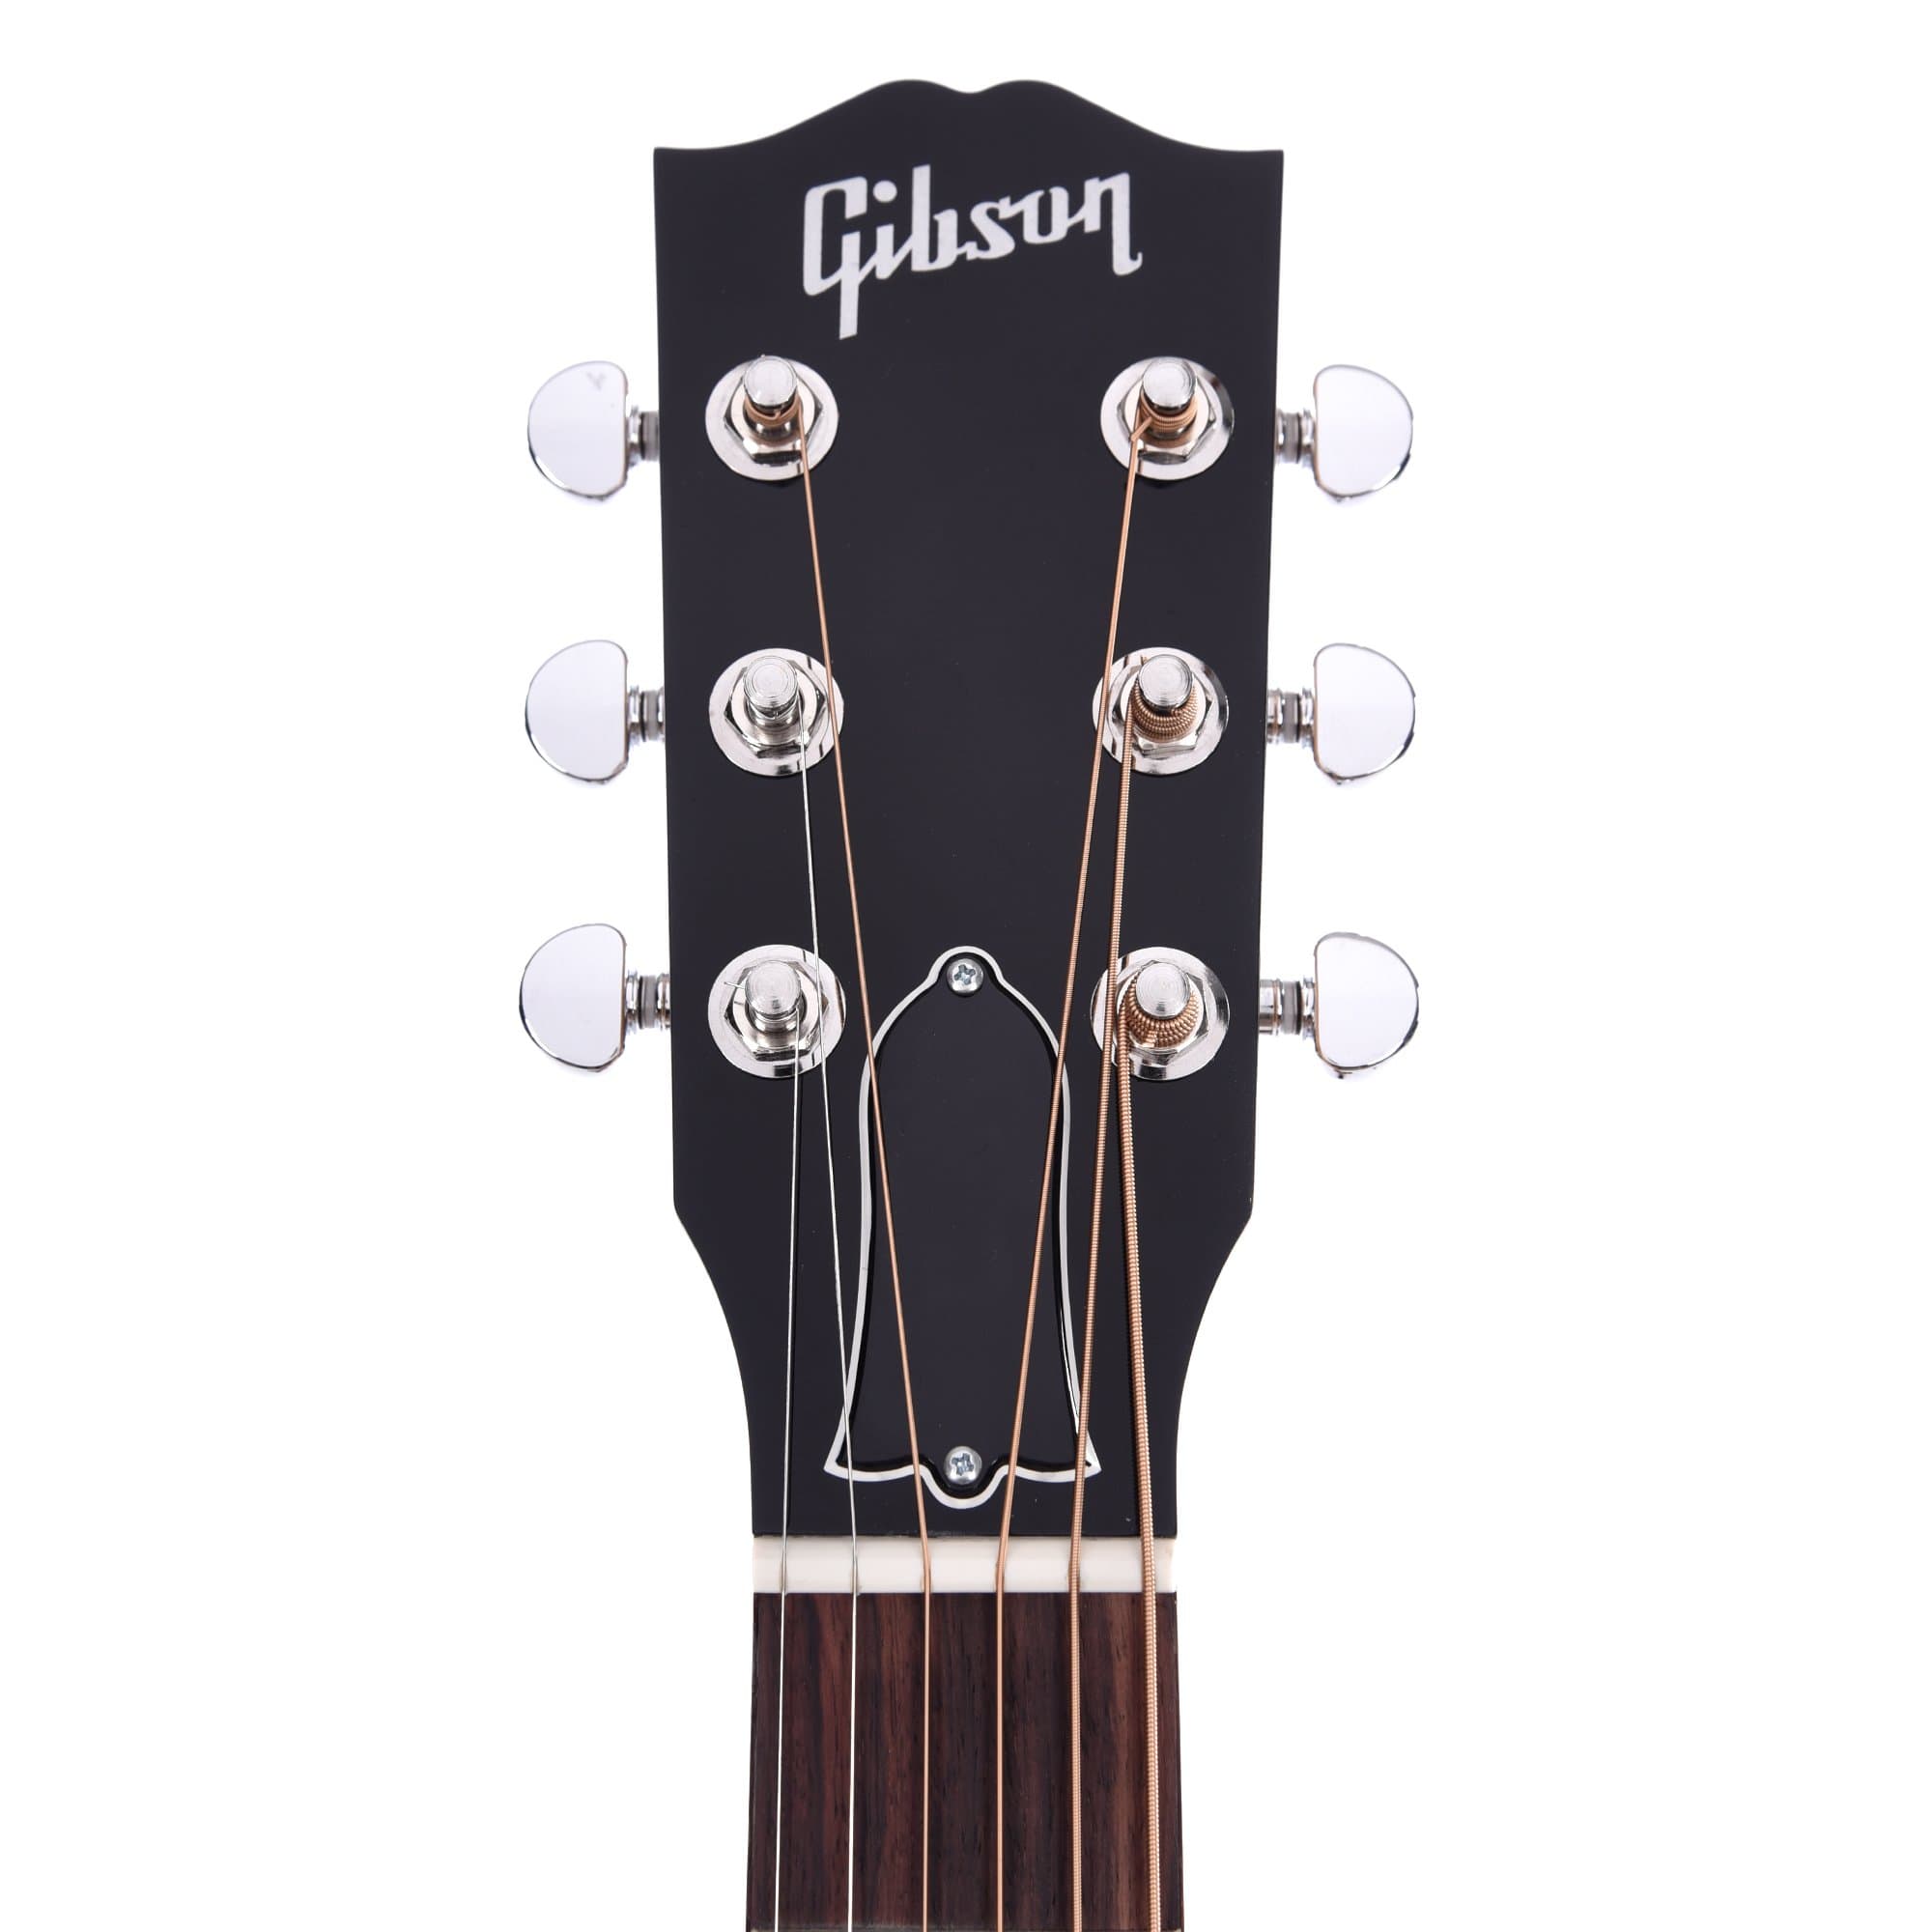 Gibson Montana J-45 Mahogany M 2019 Antique Natural LEFTY Acoustic Guitars / Left-Handed